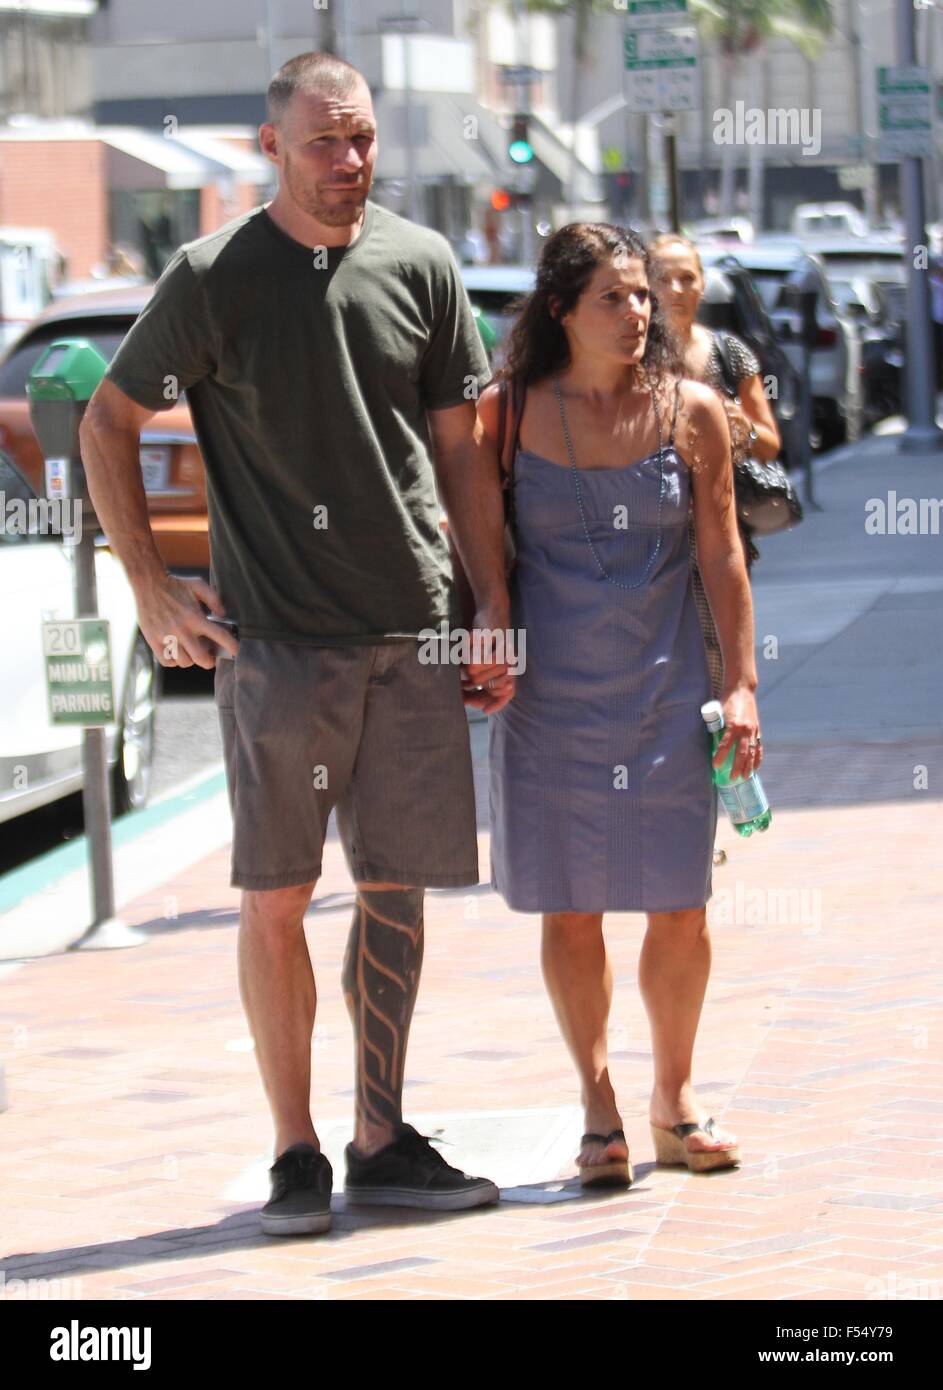 Rage Against the Machine bassist, Tim Commerford with his wife in